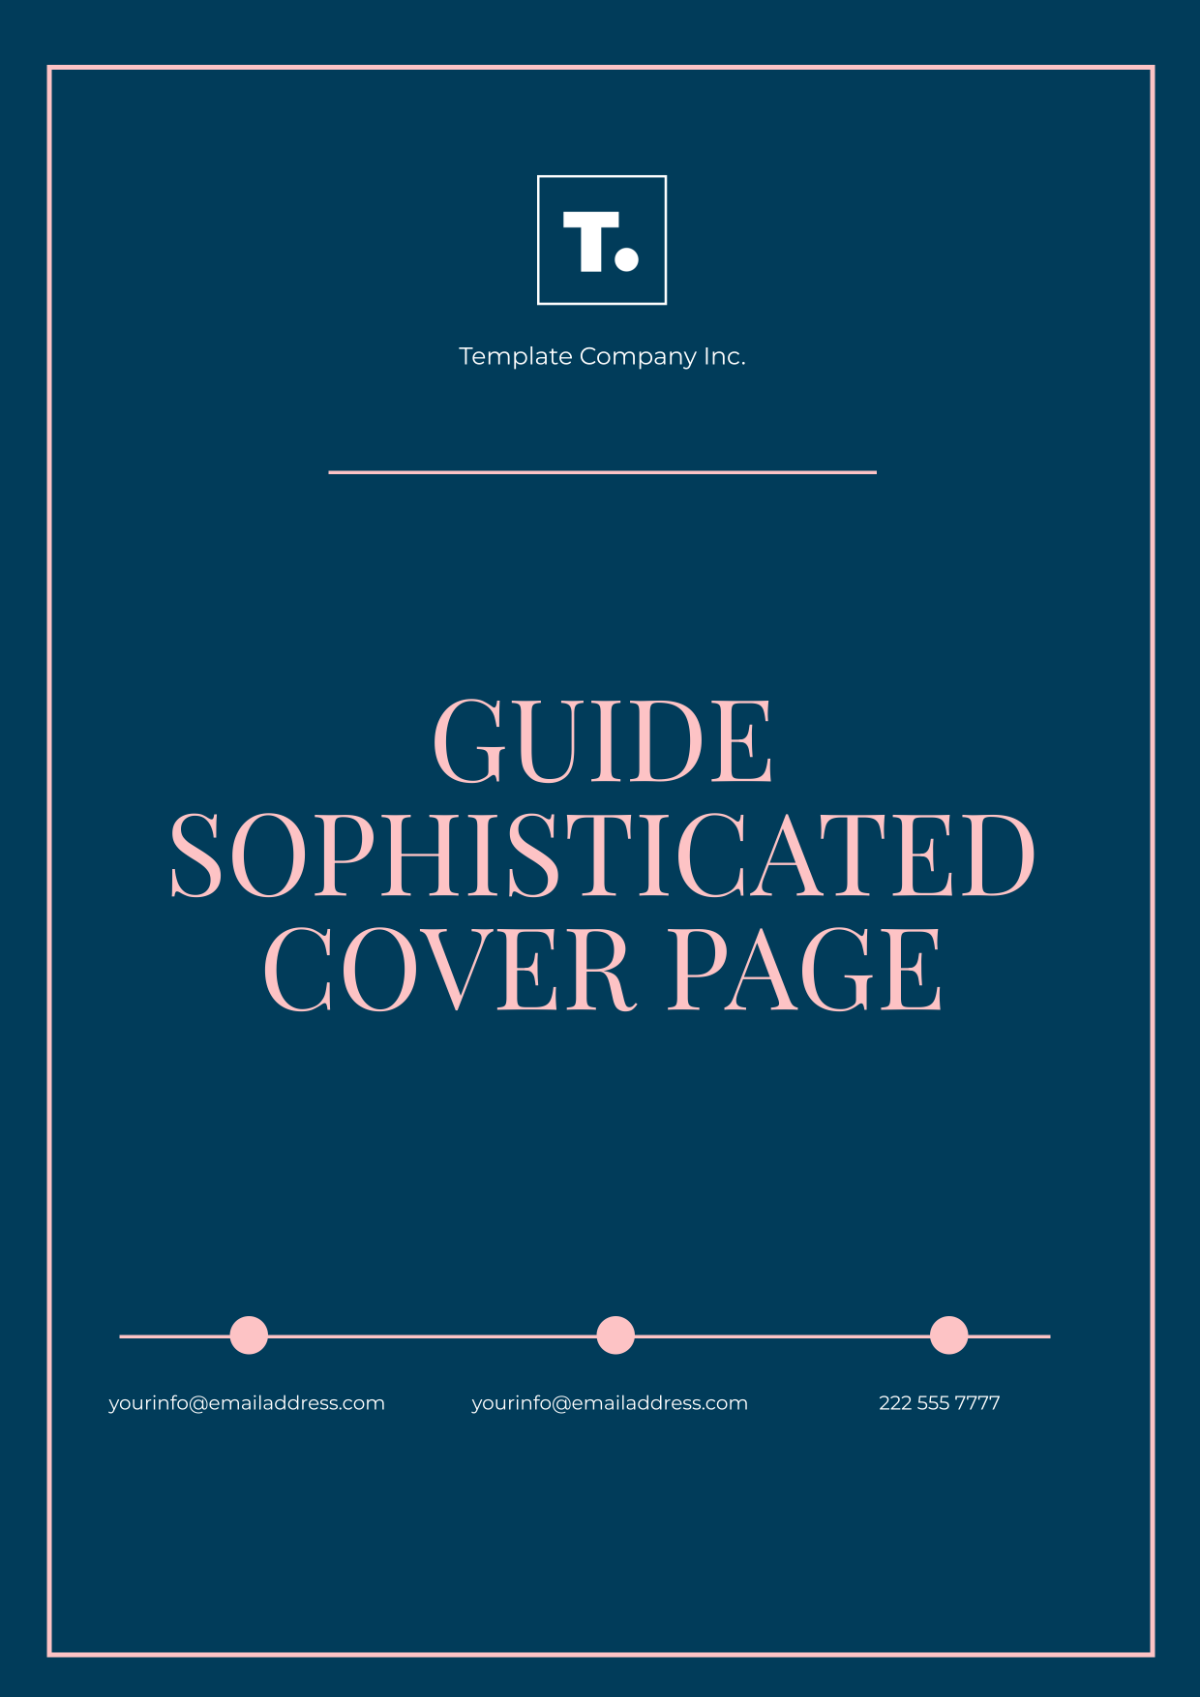 Free Guide Sophisticated Cover Page Template